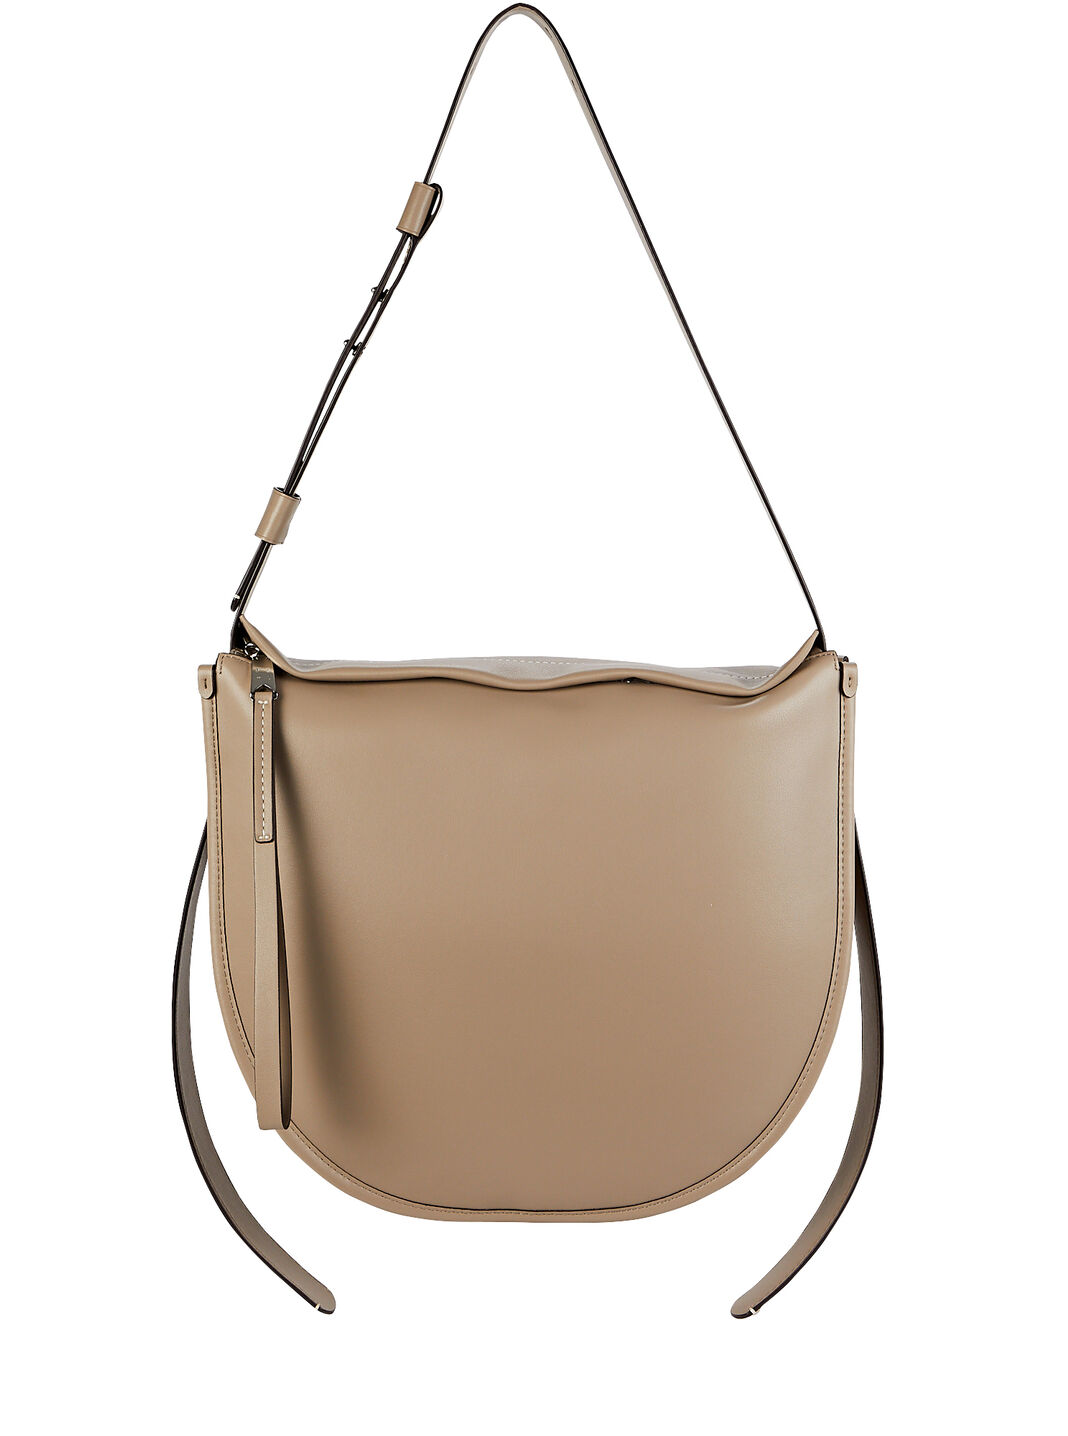 PROENZA SCHOULER WHITE LABEL Baxter Zip Leather Hobo Bag in Brown